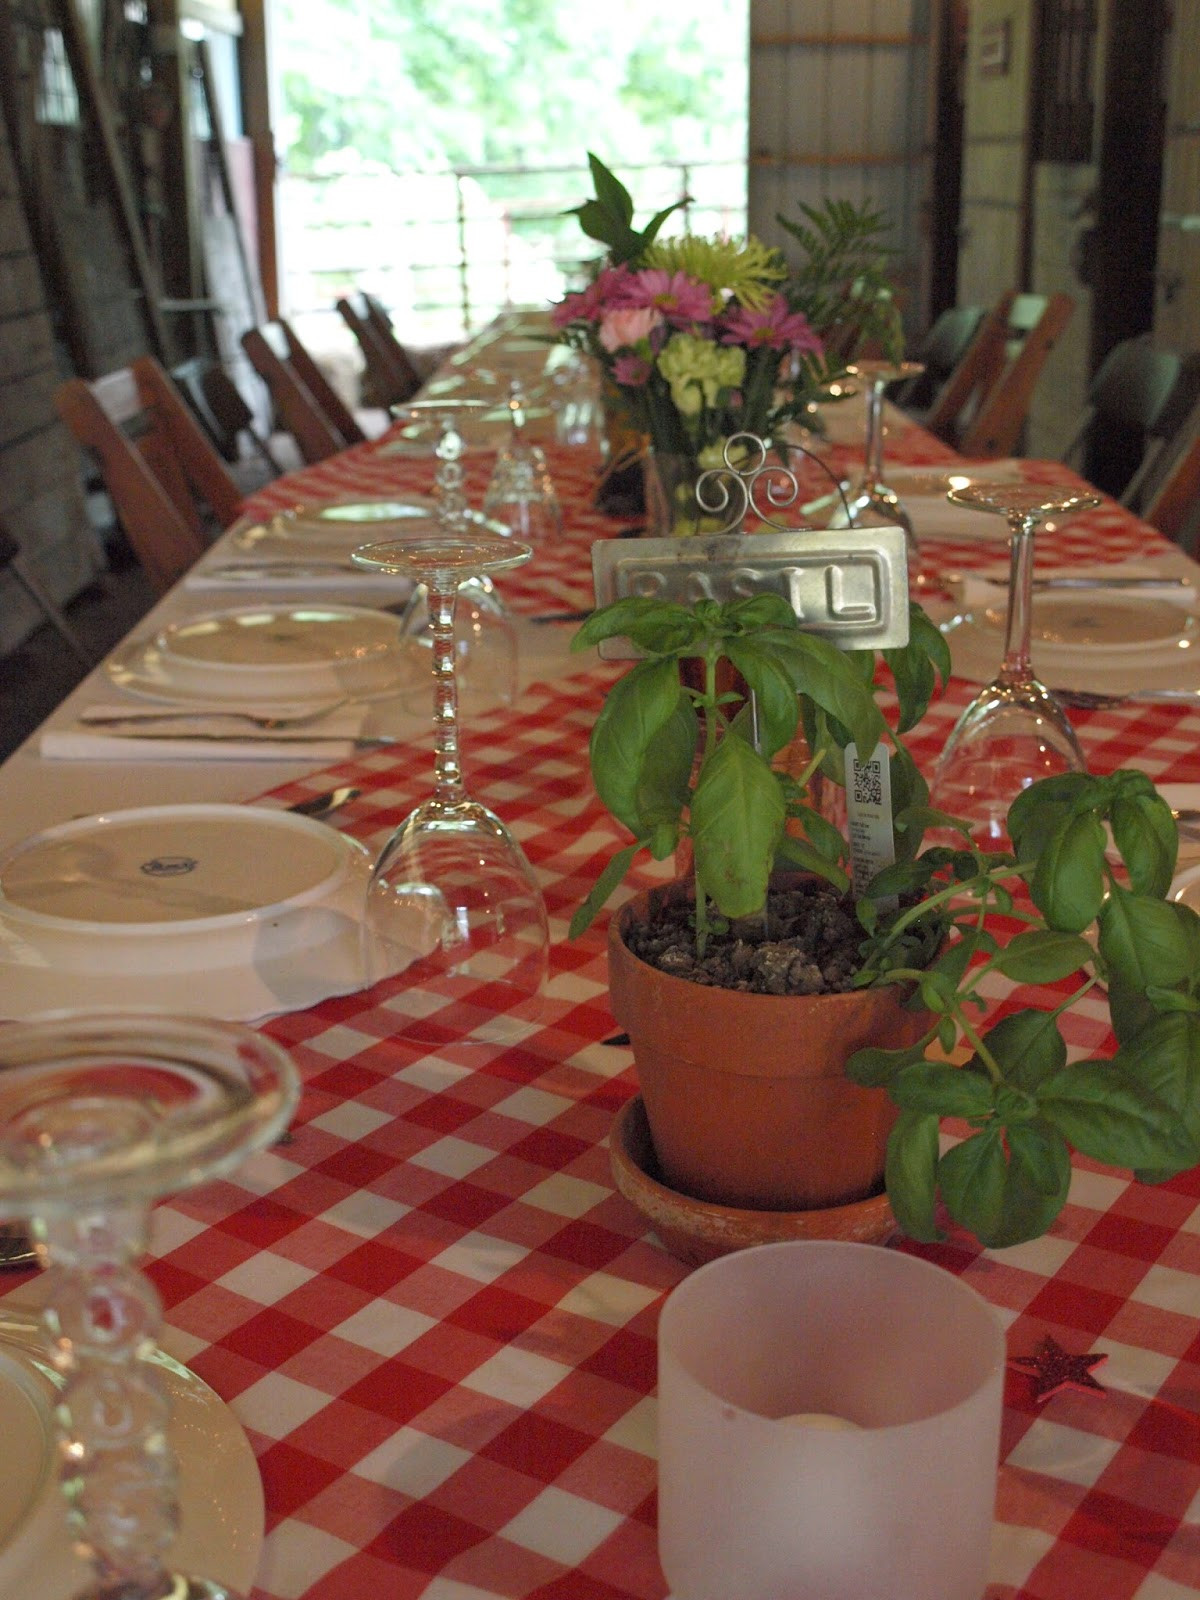 Dinner Party Centerpieces Ideas
 Ohio Thoughts Italian Dinner Party